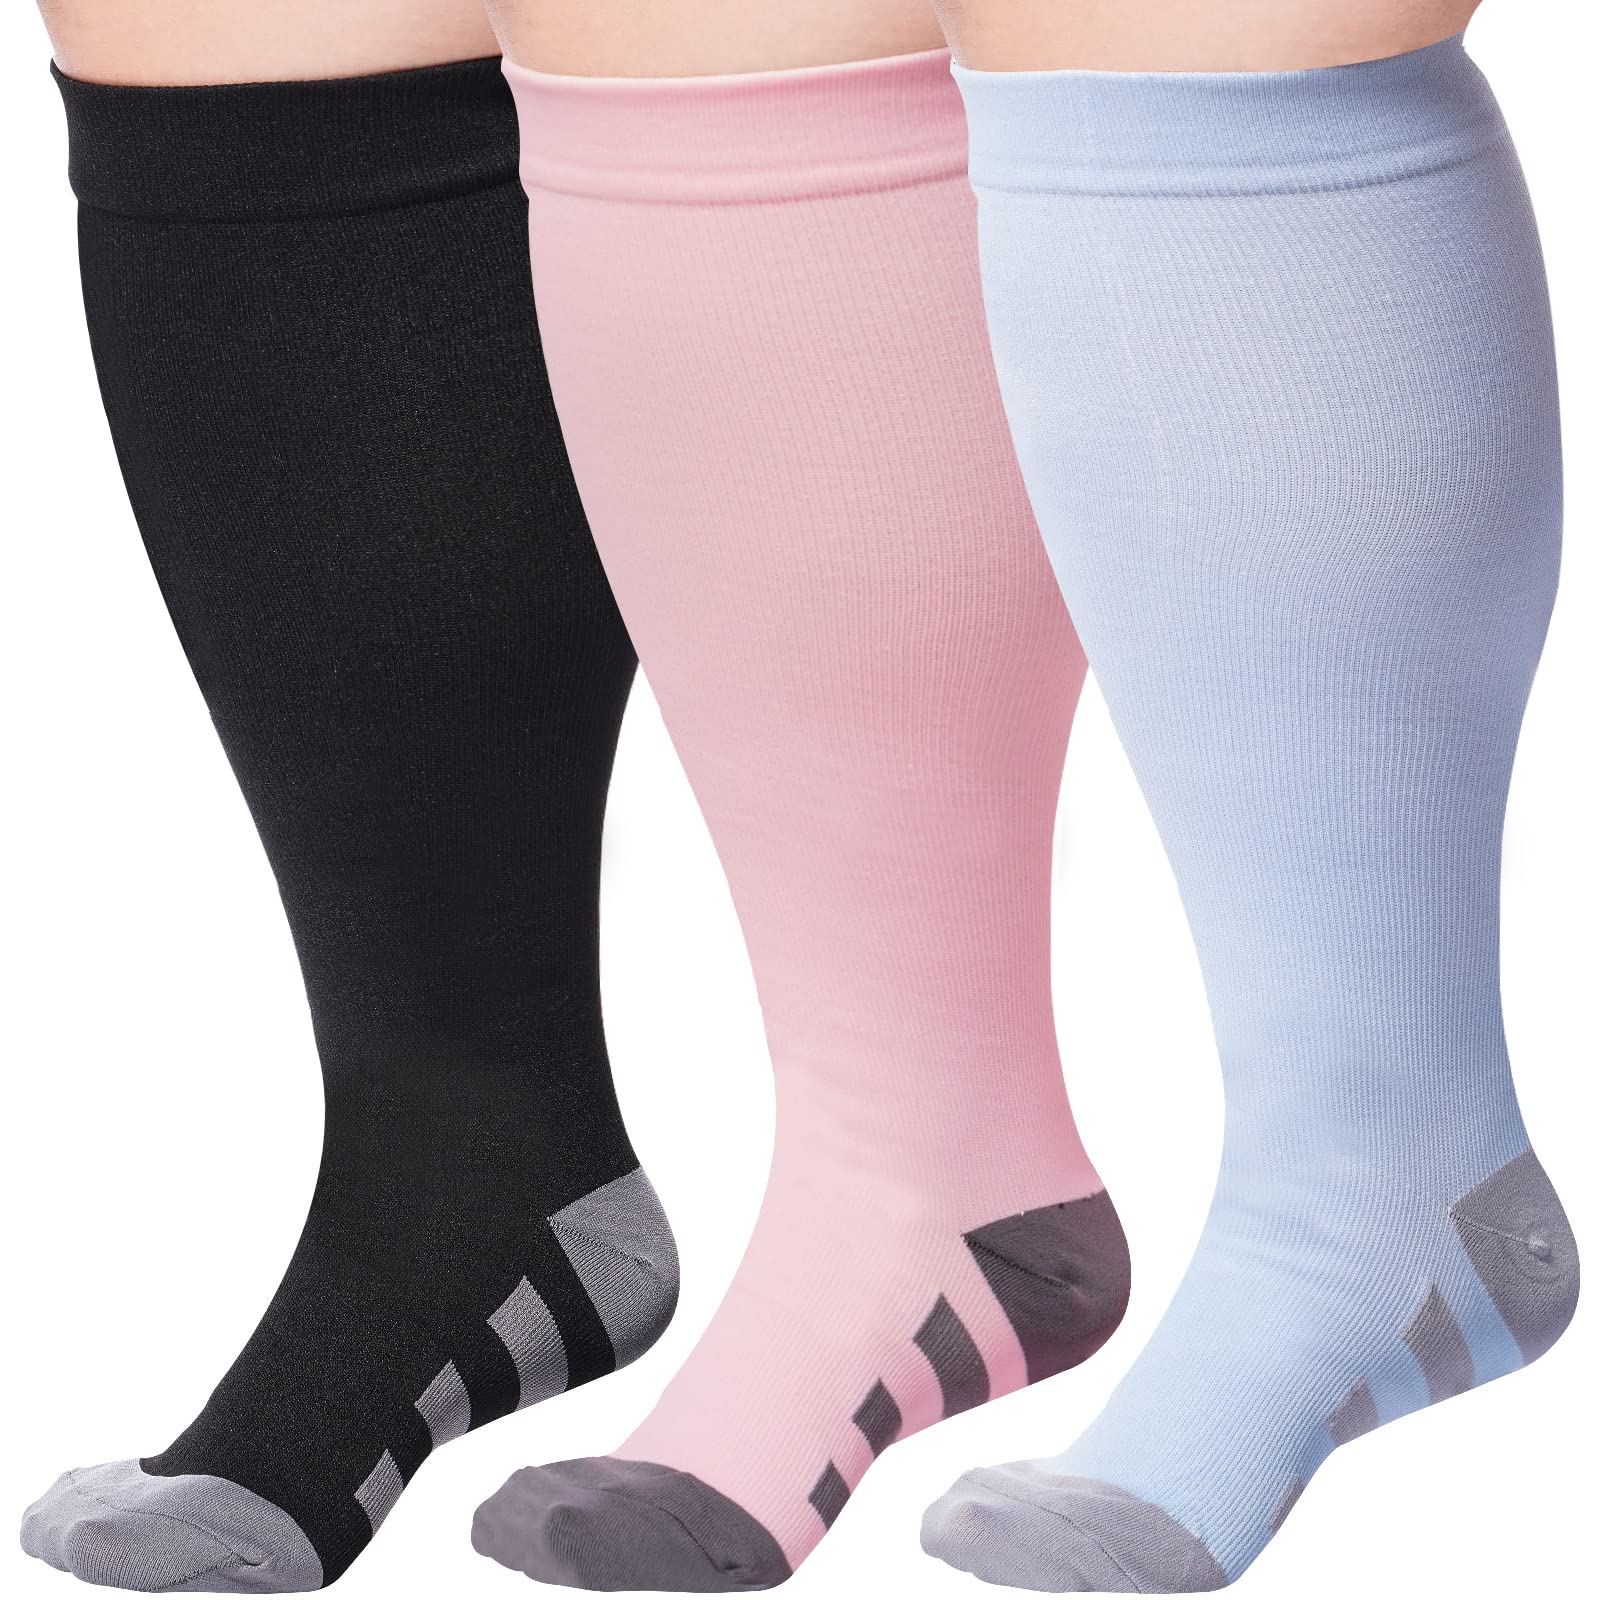 3 Pairs Plus Size Knee High Compression Socks for Women & Men-Black,Pink,Blue - Moon Wood